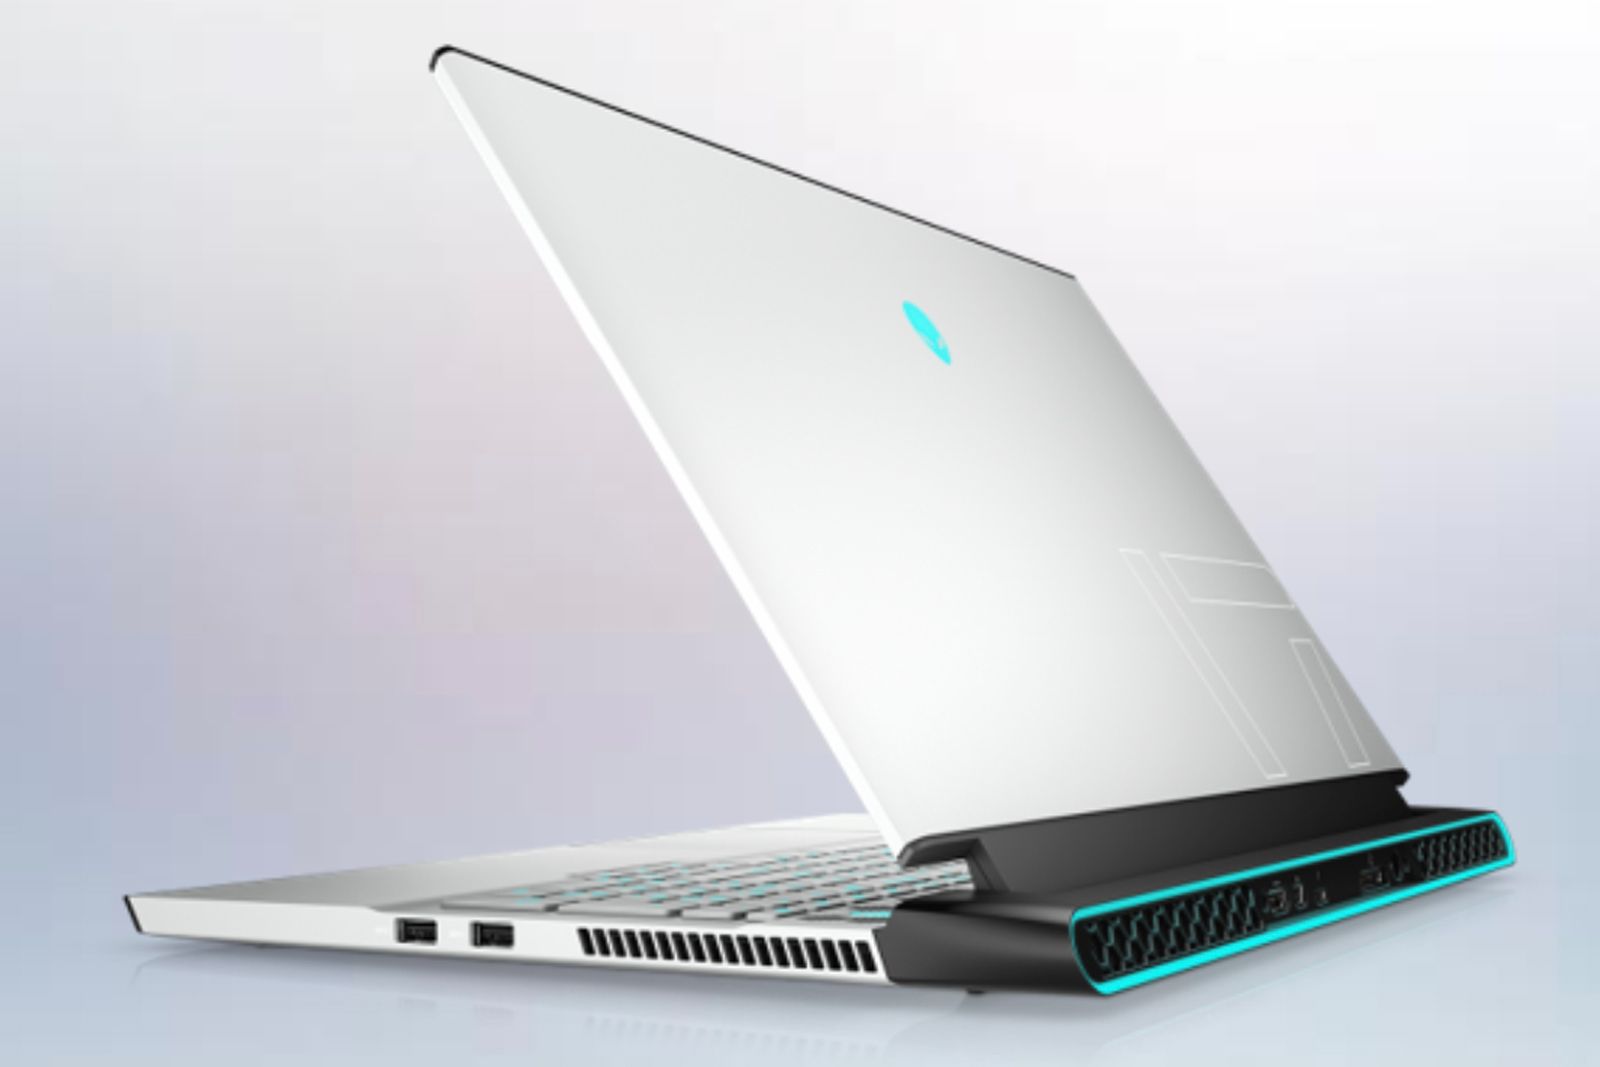 Dell redesigns the Alienware m15 and m17 ‘from the ground up’ image 1